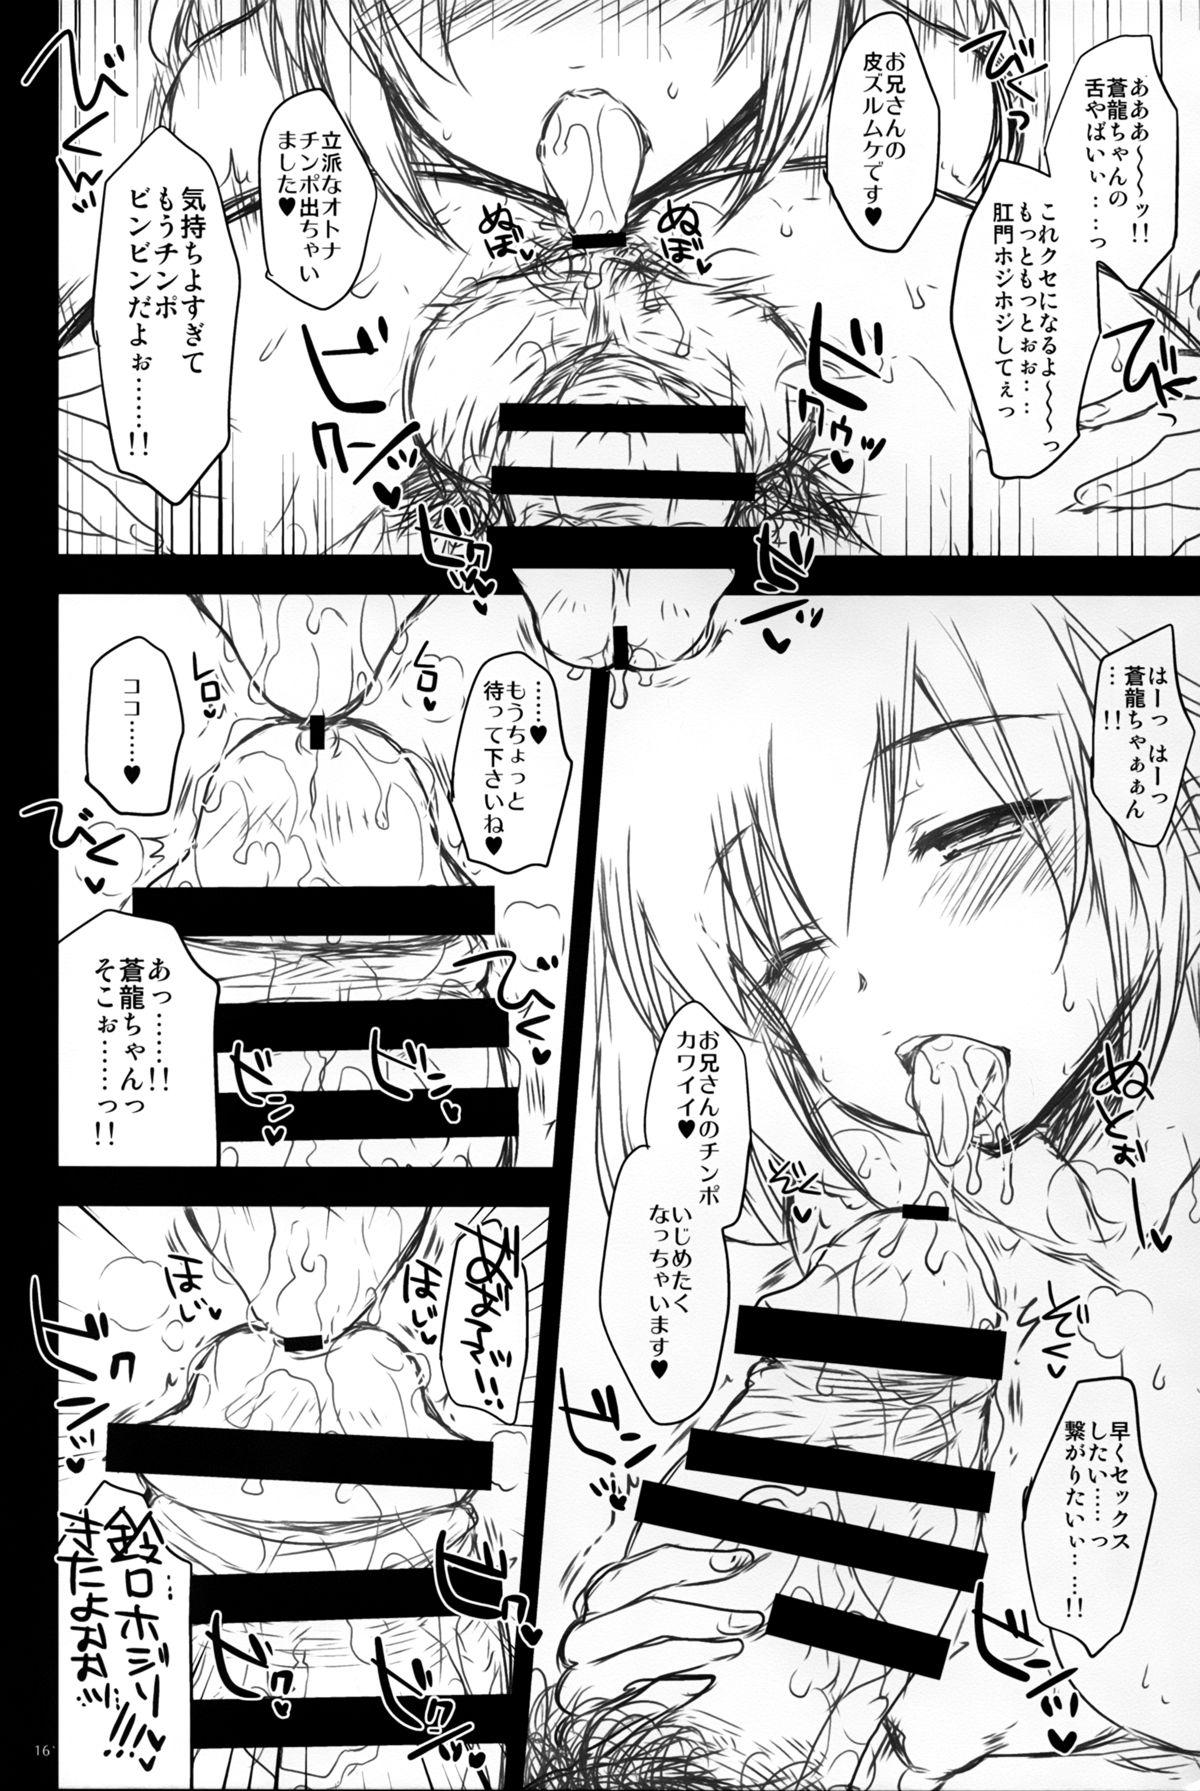 Sologirl GARIGARI 74 - Kantai collection Shaved - Page 16